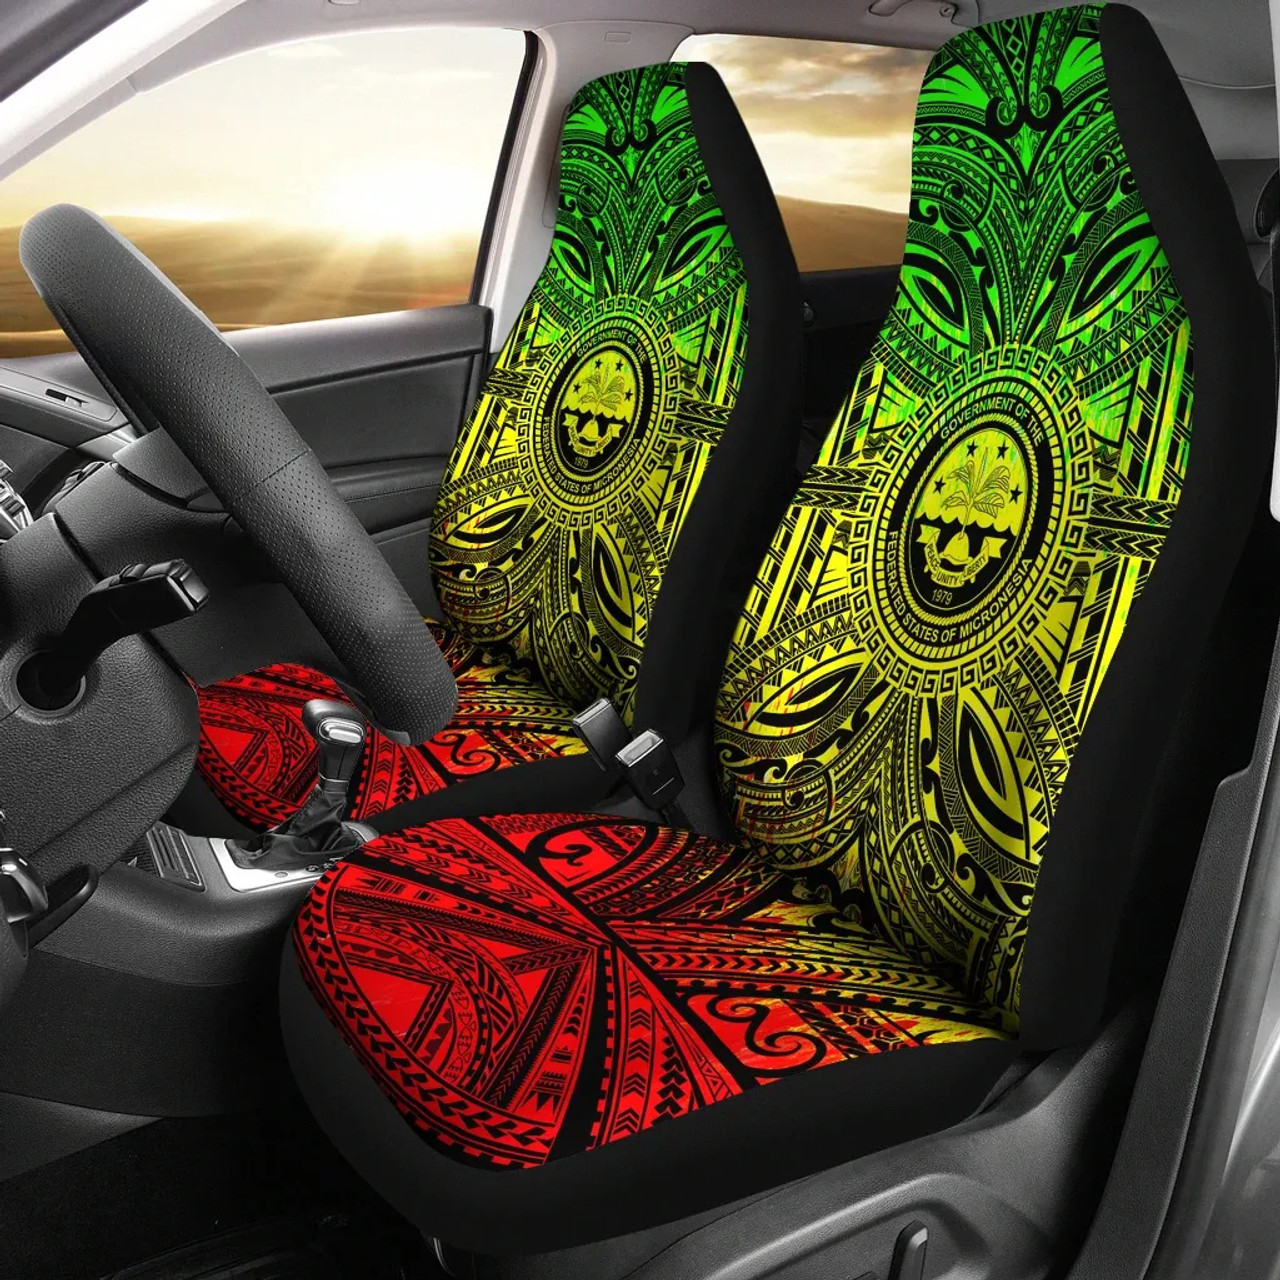 Federated States of Micronesia Car Seat Cover - Federated States of Micronesia Coat Of Arms Polynesian Reggae Style